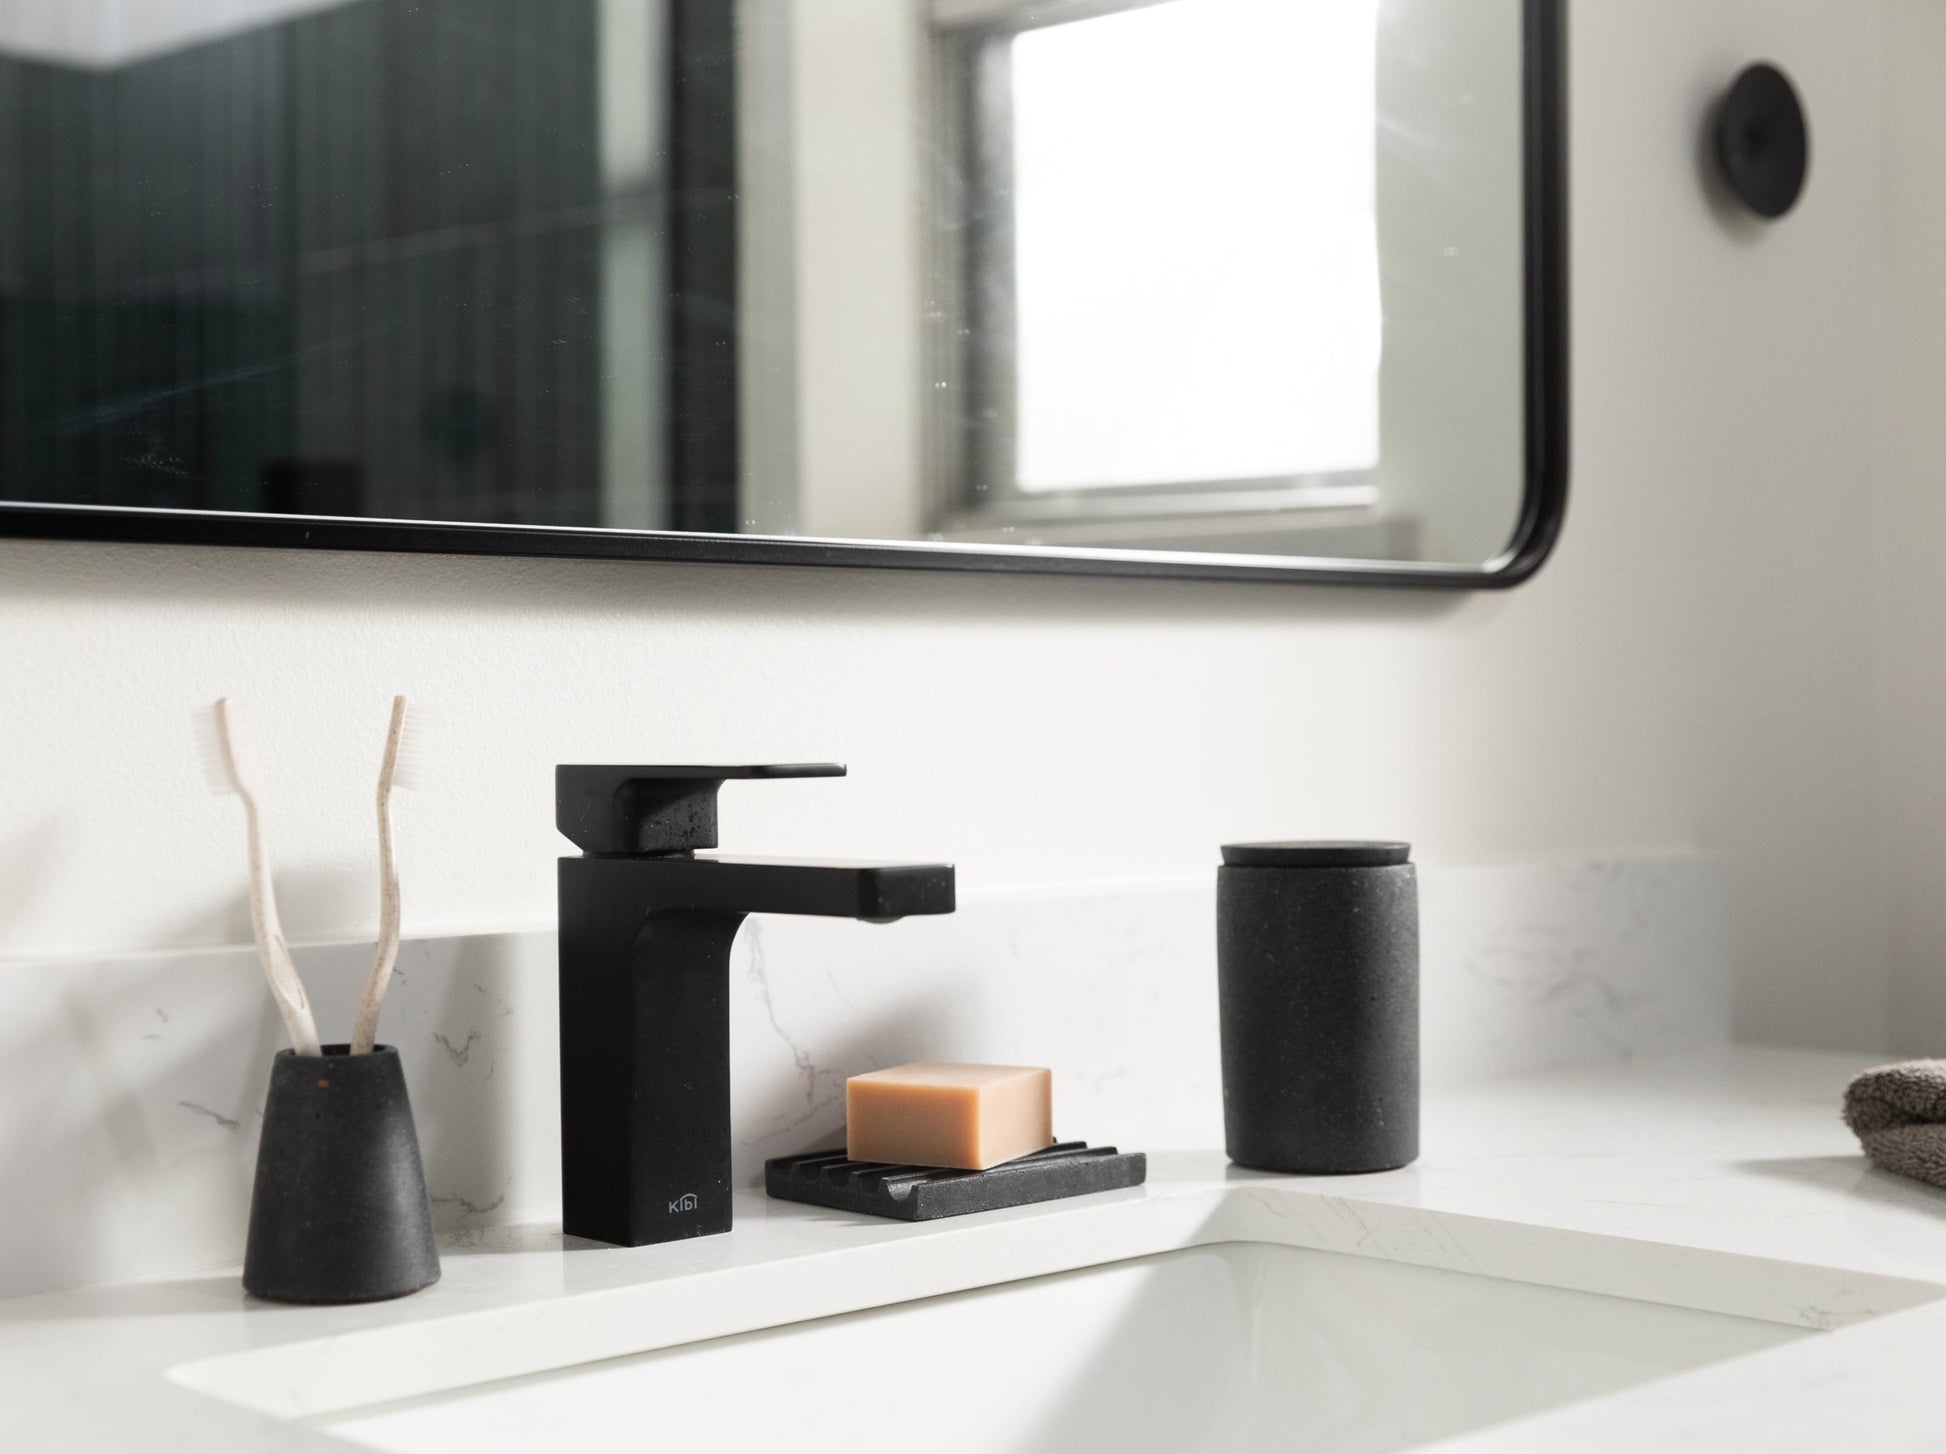 Toothbrush Holder, Soap Dish, Cotton Swab Holder, & Wall Hook in Black Terrazzo, styled by a sink.